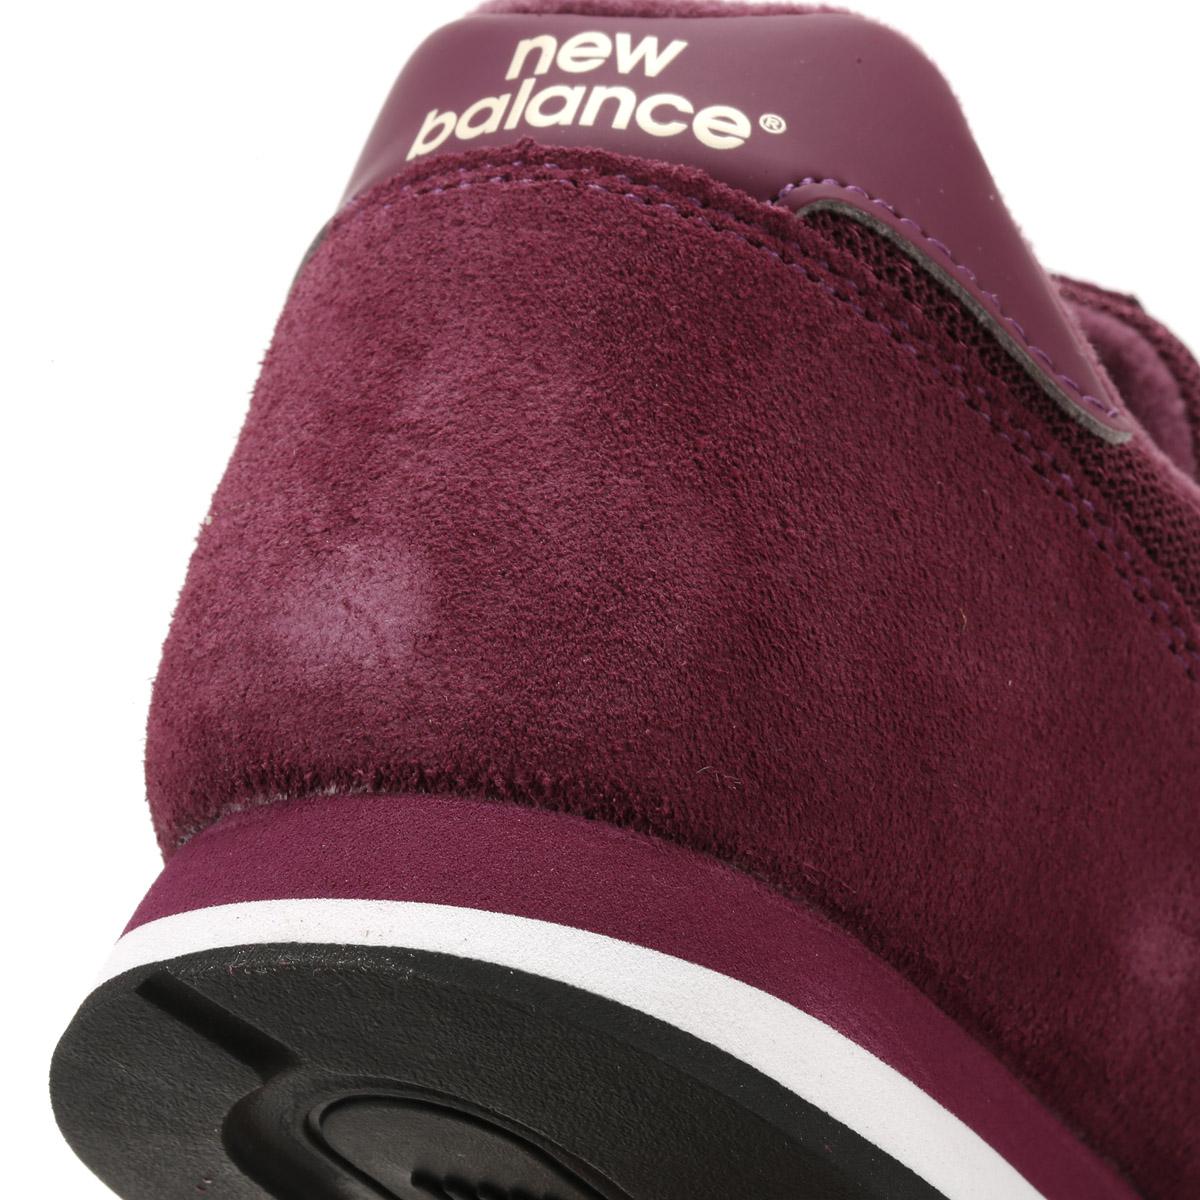 New Balance Womens Burgundy Suede 373 Trainers in Burgundy / Pink (Purple)  - Lyst